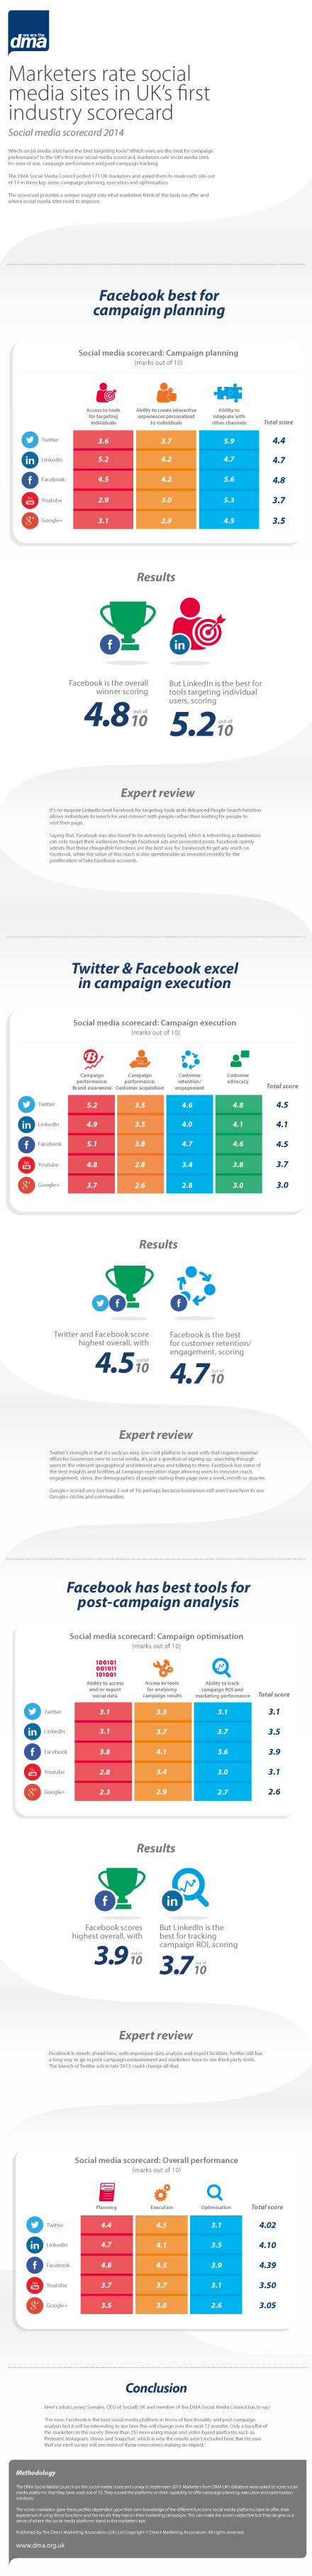 Marketers rate social media sites in UK's first industry scorecard